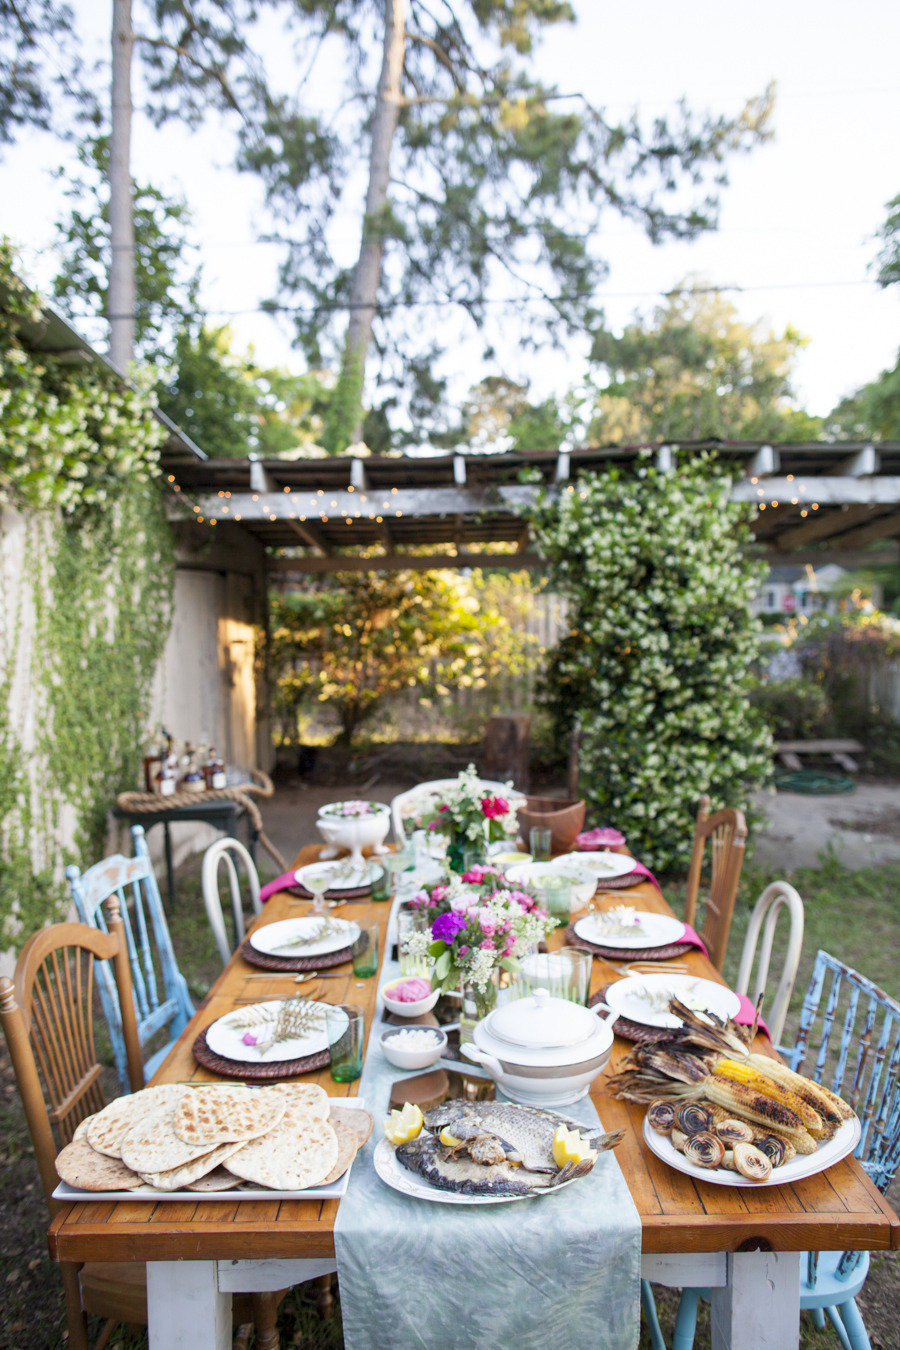 Ideas For Backyard Party
 50 Outdoor Party Ideas You Should Try Out This Summer